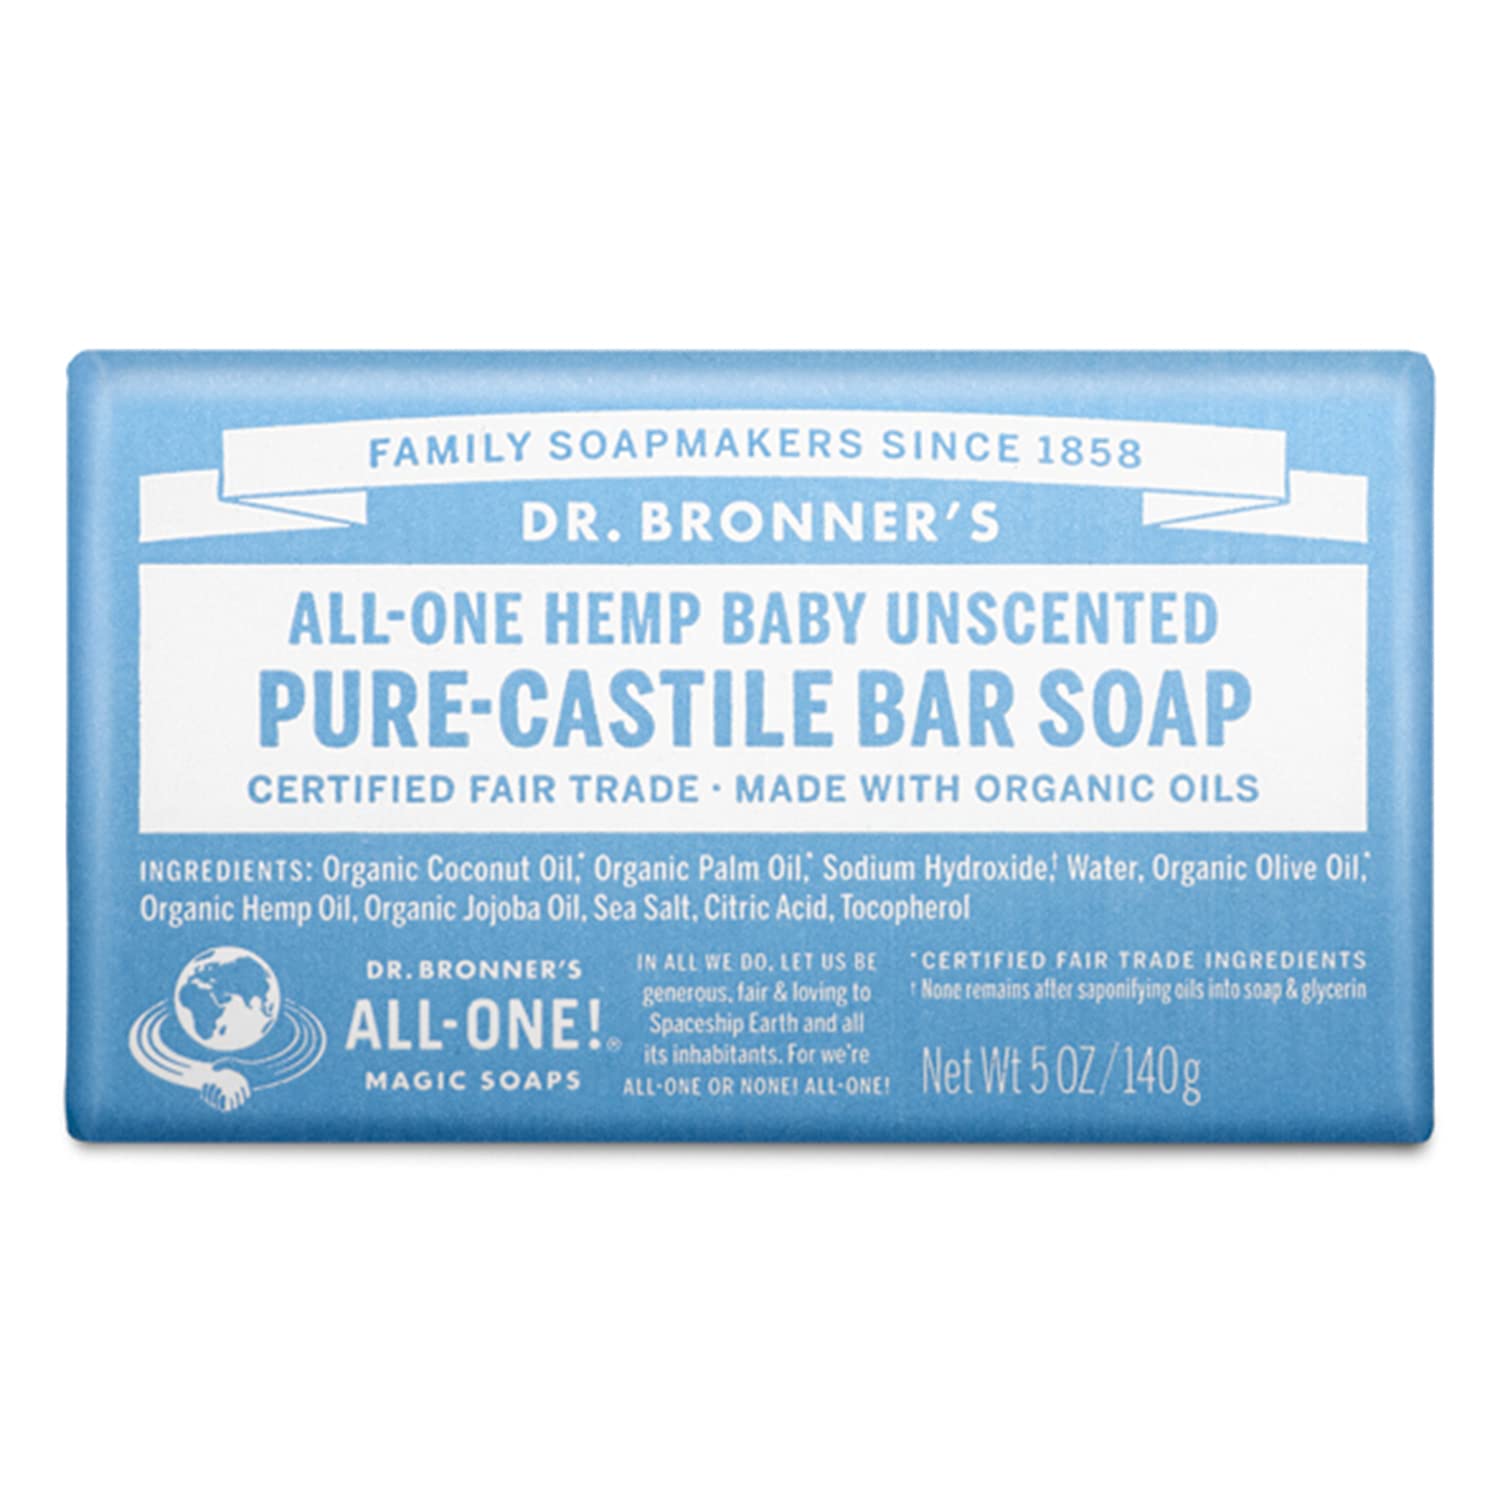 Pure-Castile Bar Soap Baby Unscented 140g, Dr. Bronner's